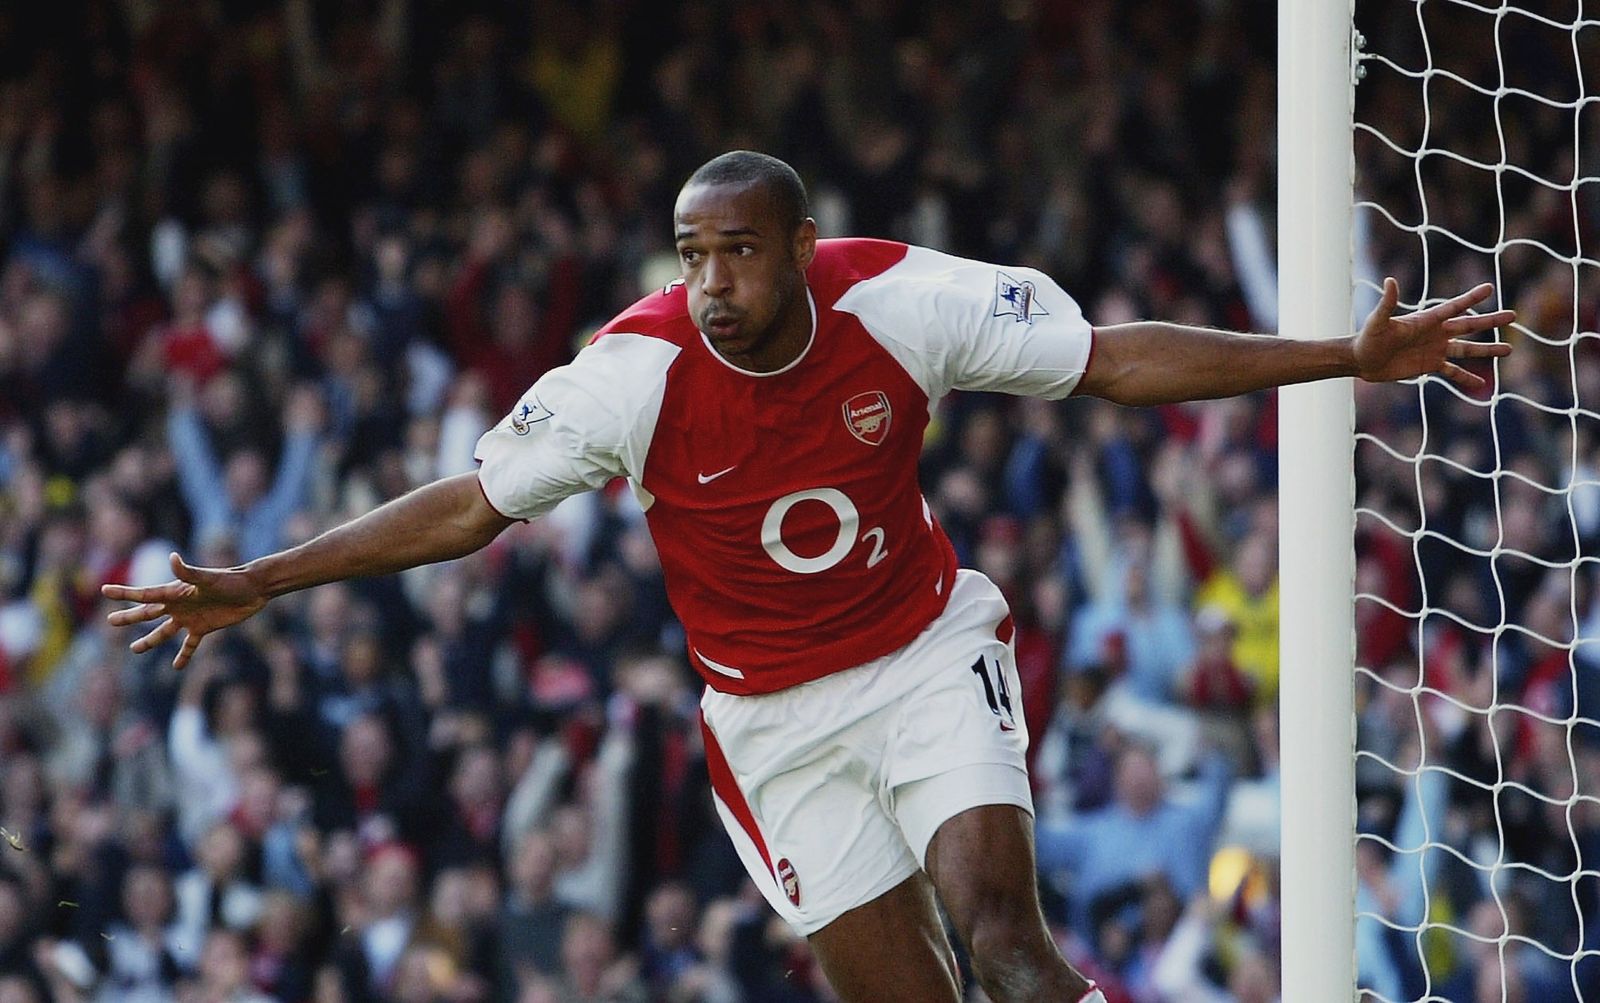 Thierry Henry Hall of Fame Inductee | Premier League